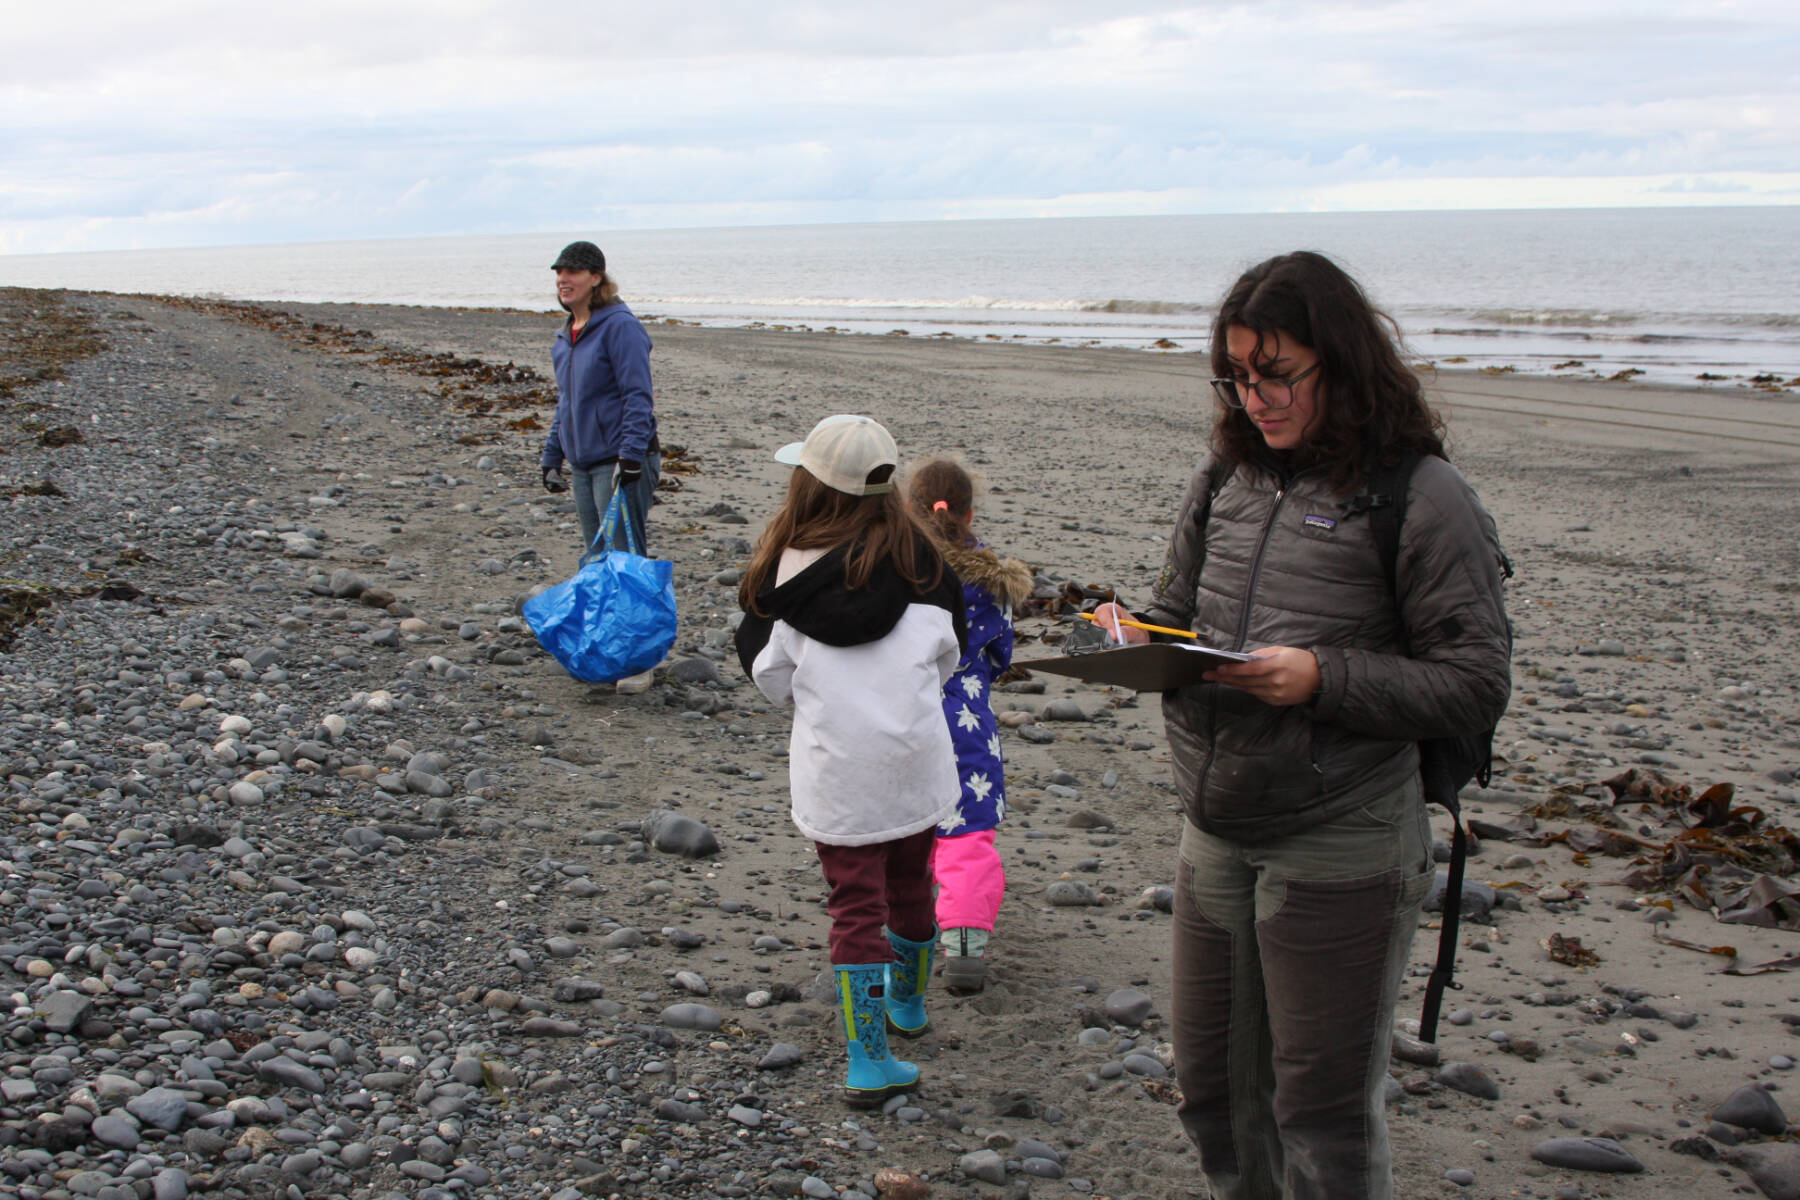 Wynn Visitor Center coordinator Maya Nabipoor (right) records marine debris and animal carcasses found during the Anchor Point CoastWalk Clean-up on Saturday, Sept. 23, 2023 at the Anchor River State Recreation Area in Anchor Point, Alaska. (Delcenia Cosman/Homer News)